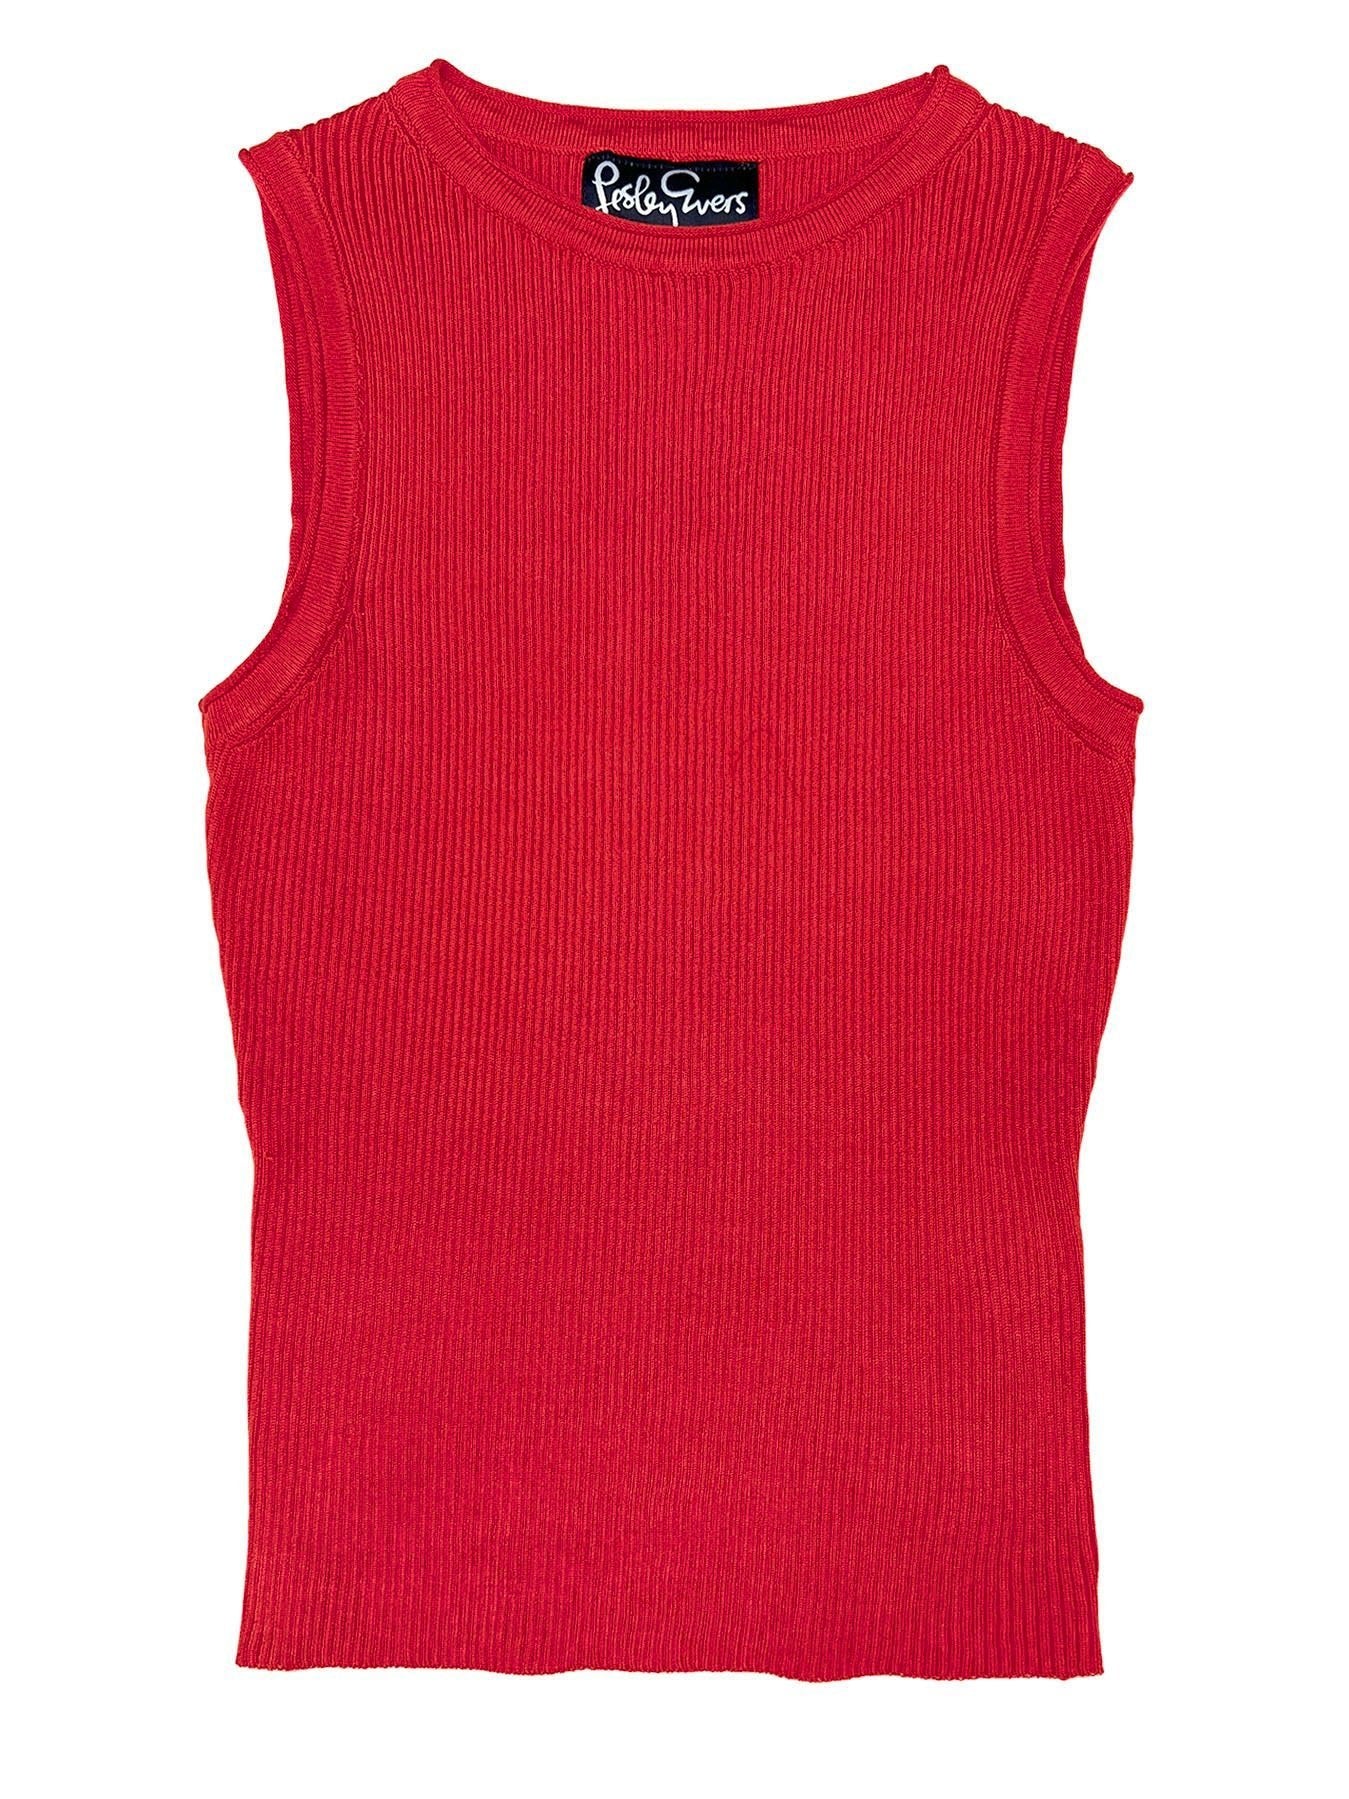 EVE top Red - Lesley Evers-Best Seller-Shop-Shop/All Products